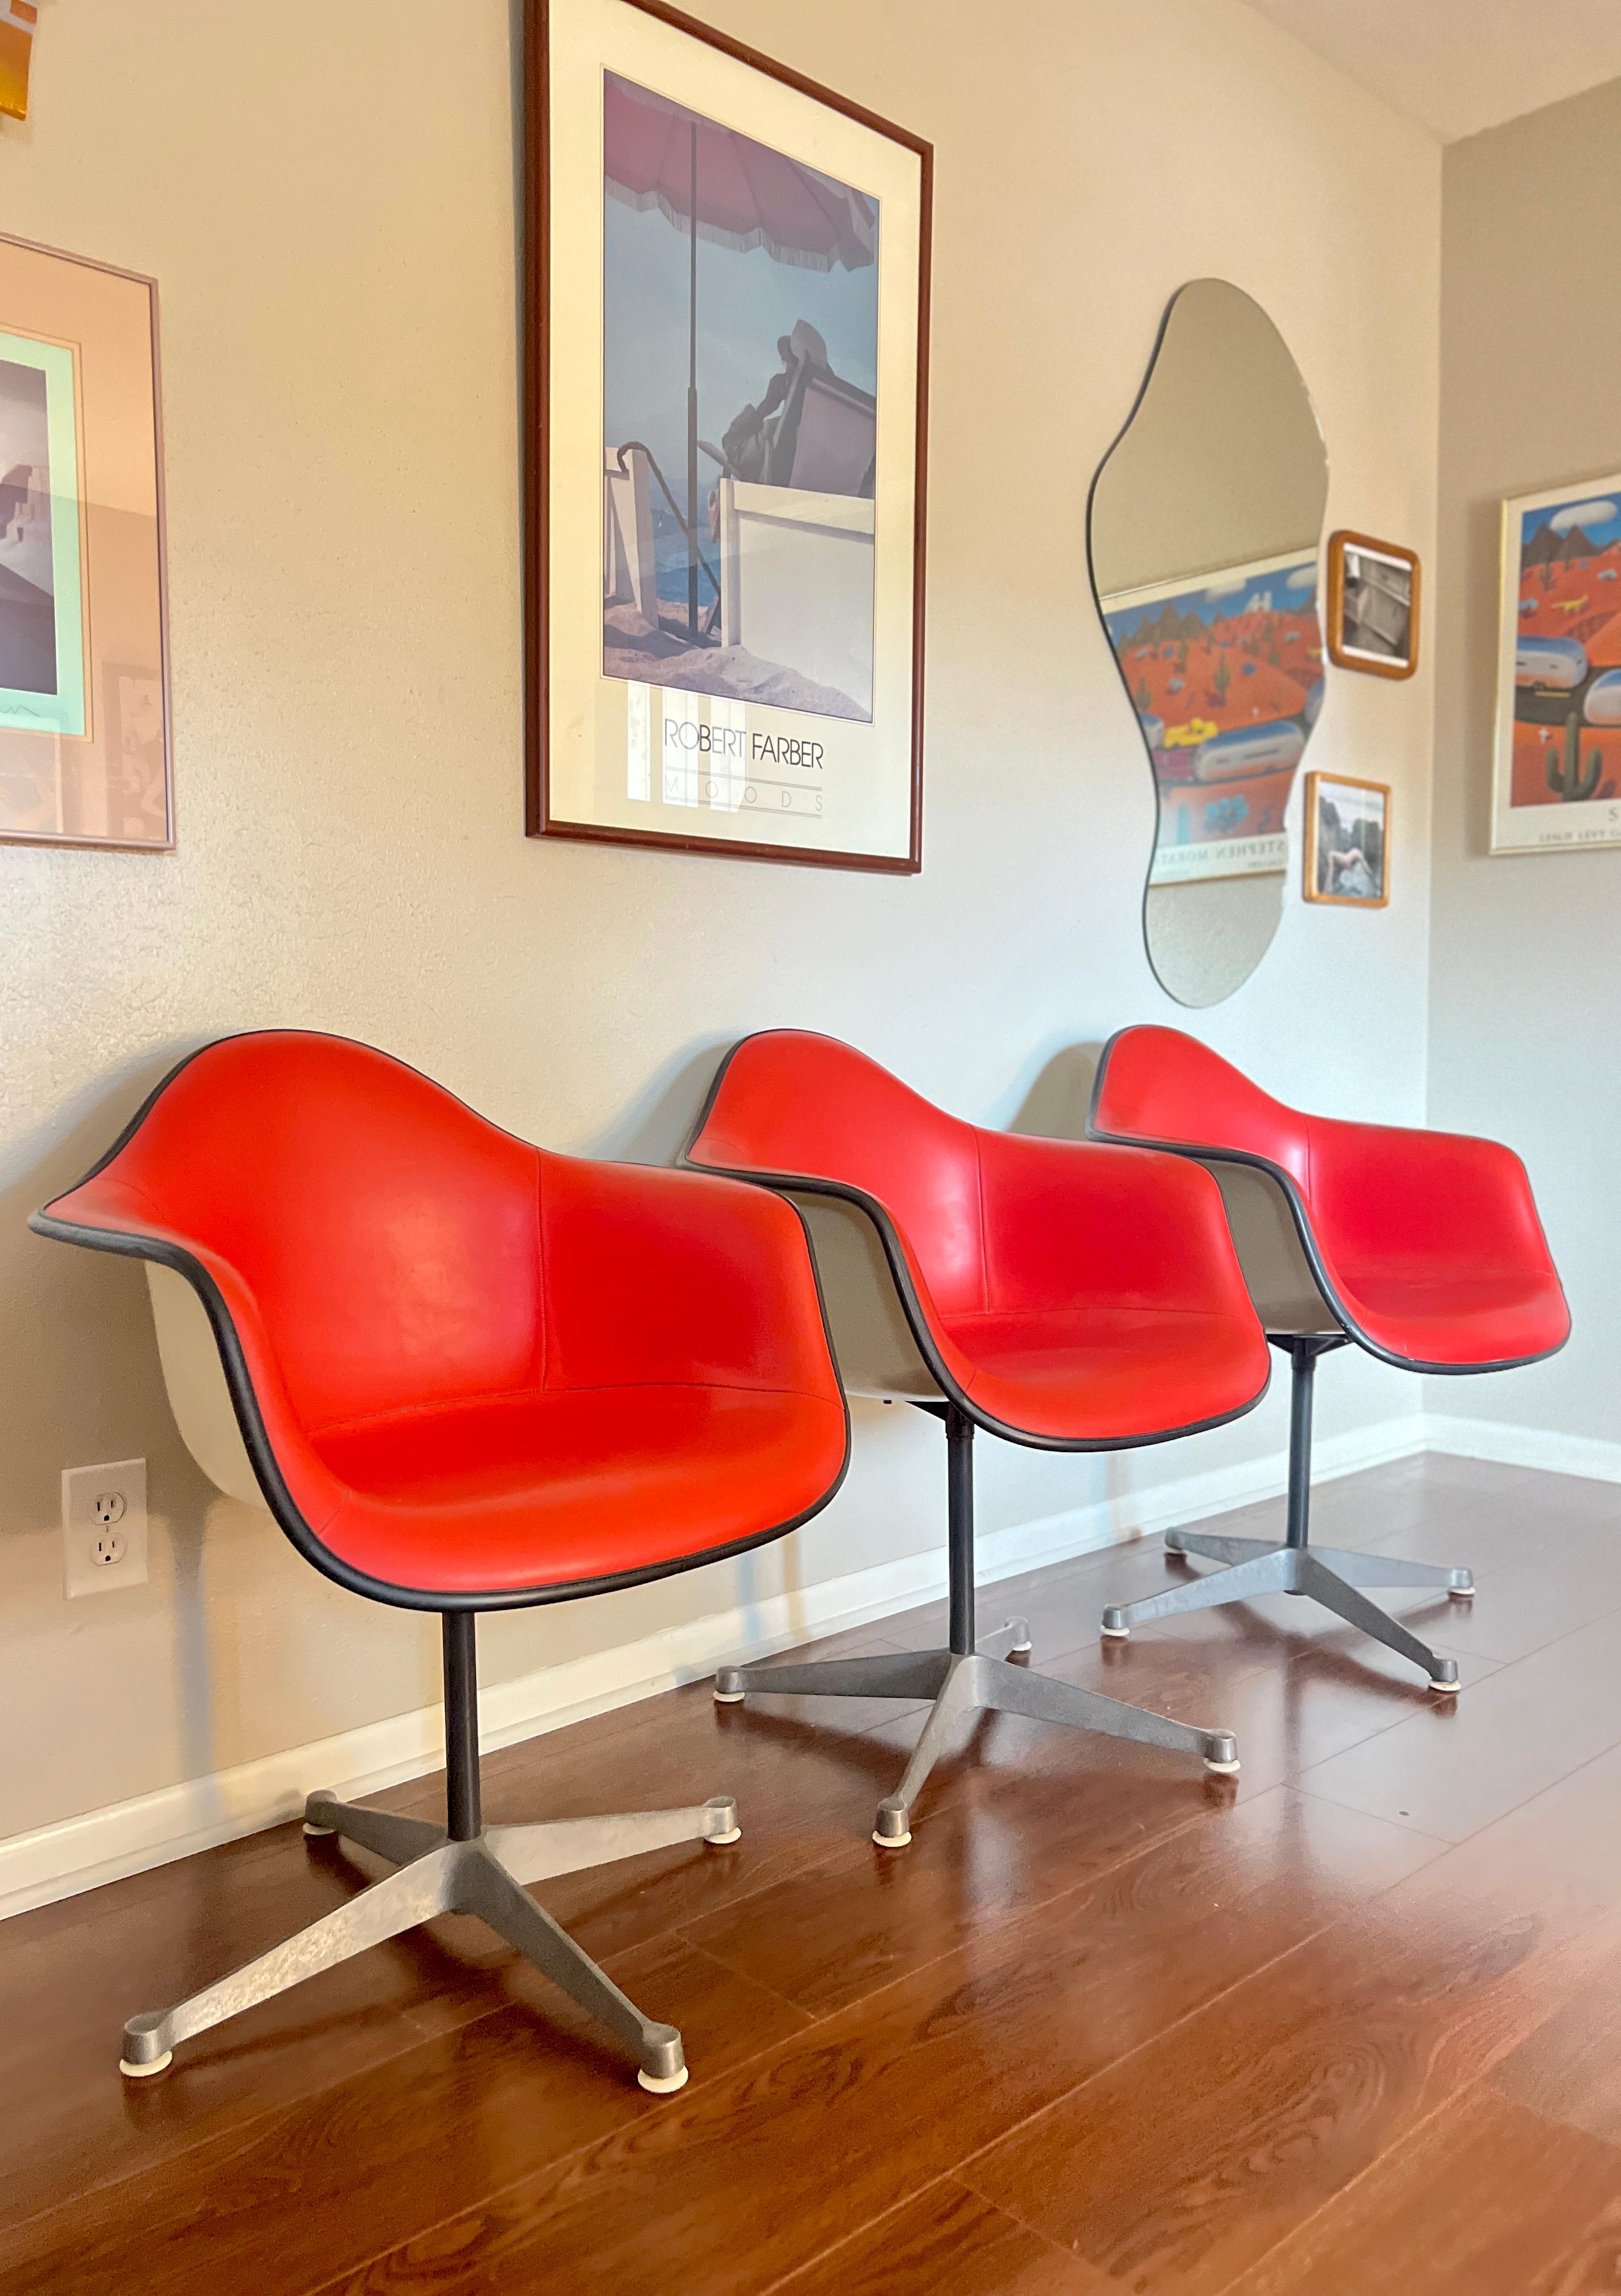 Vintage Midcentury Charles & Ray Eames Fiberglass Shell Chairs by Herman Miller 1